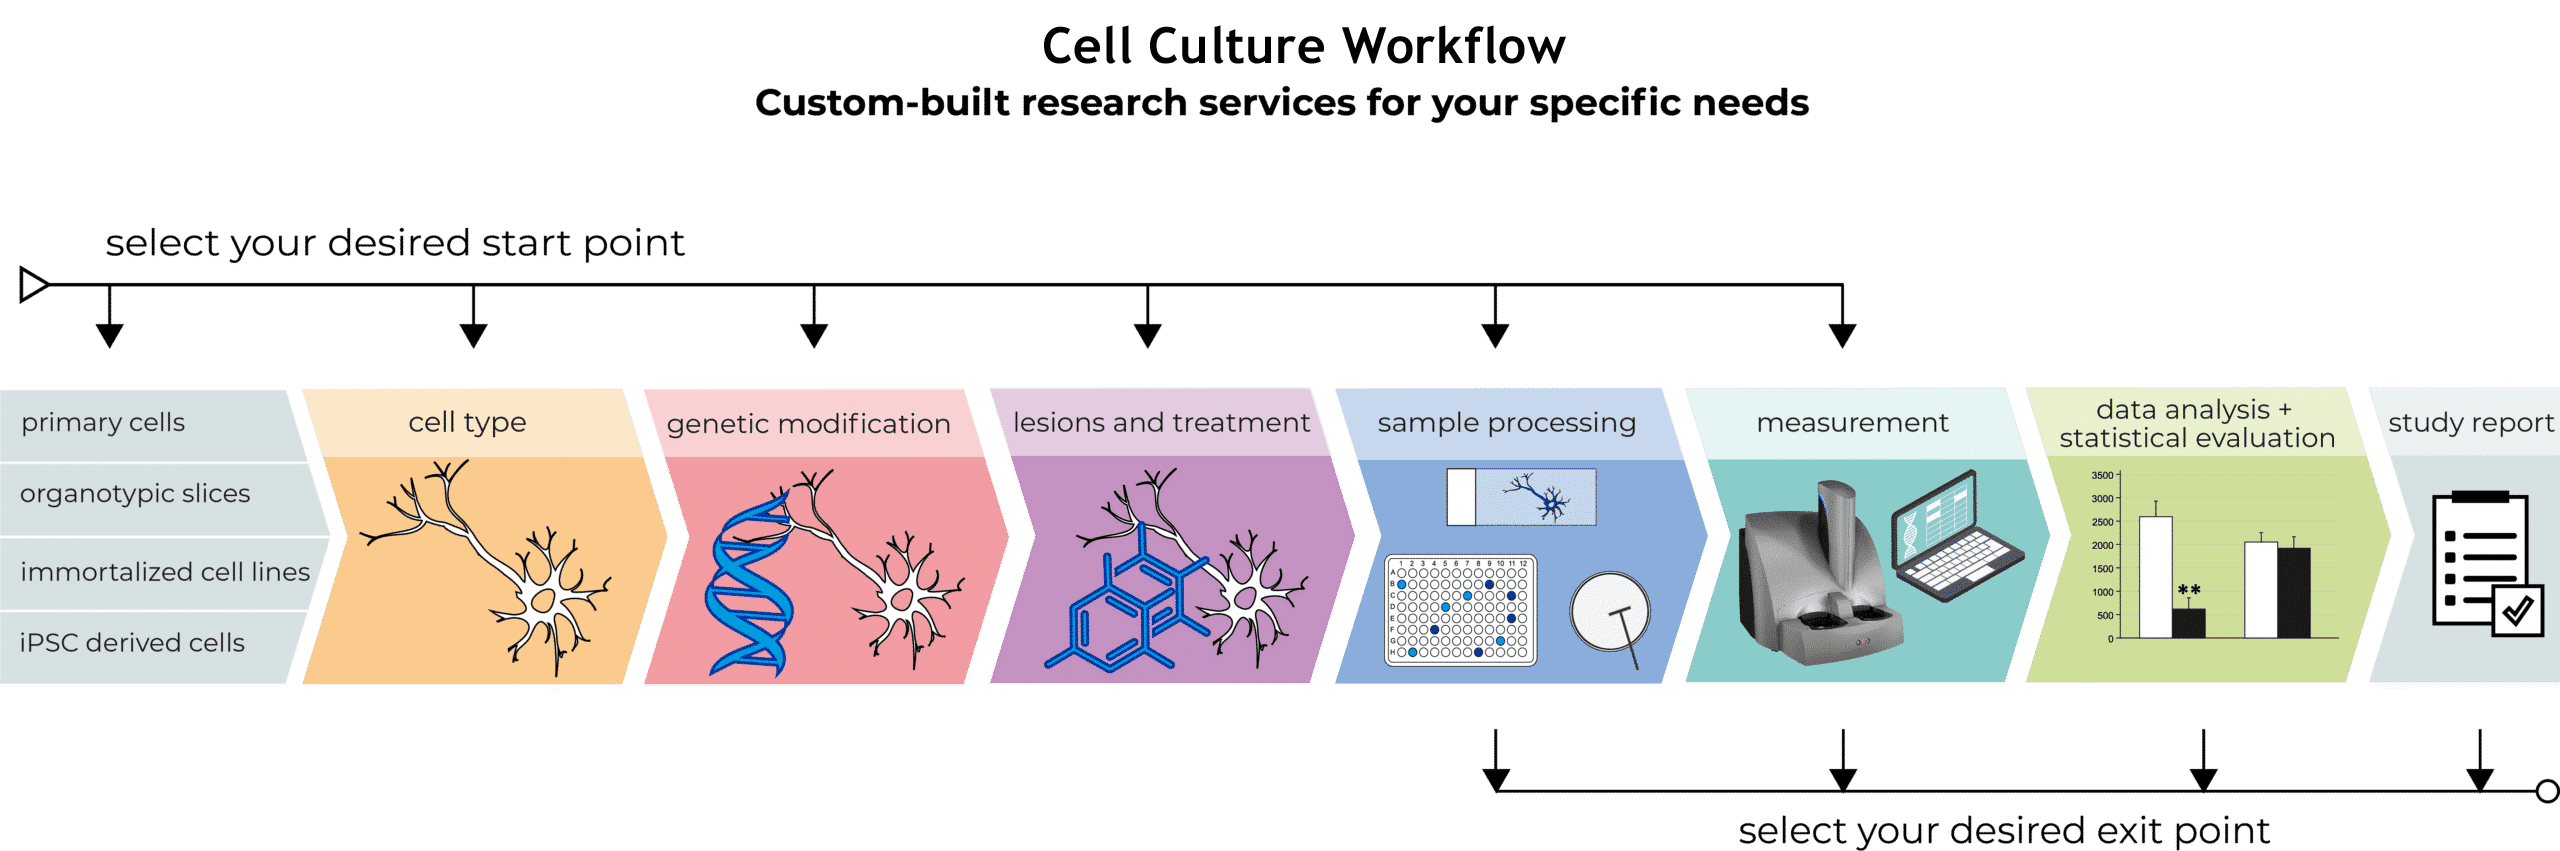 Cell Culture Workflow